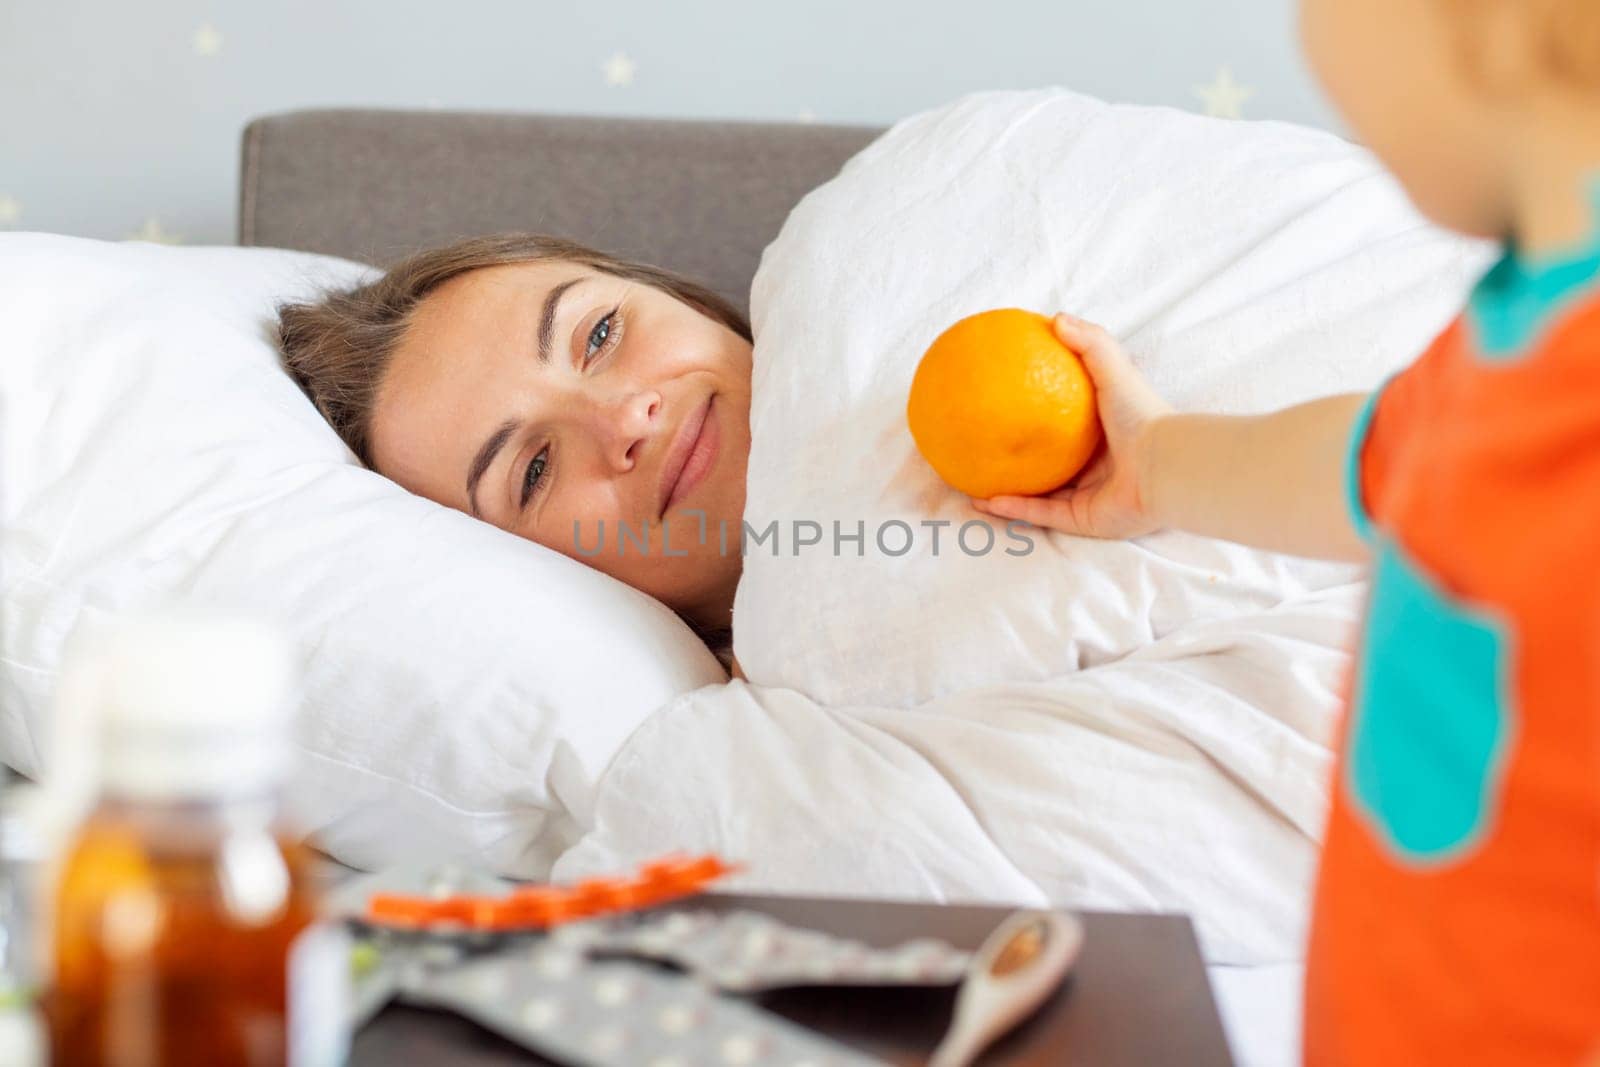 A caring young child hands an orange to their ill mother lying in bed, with medication visible on the bedside.